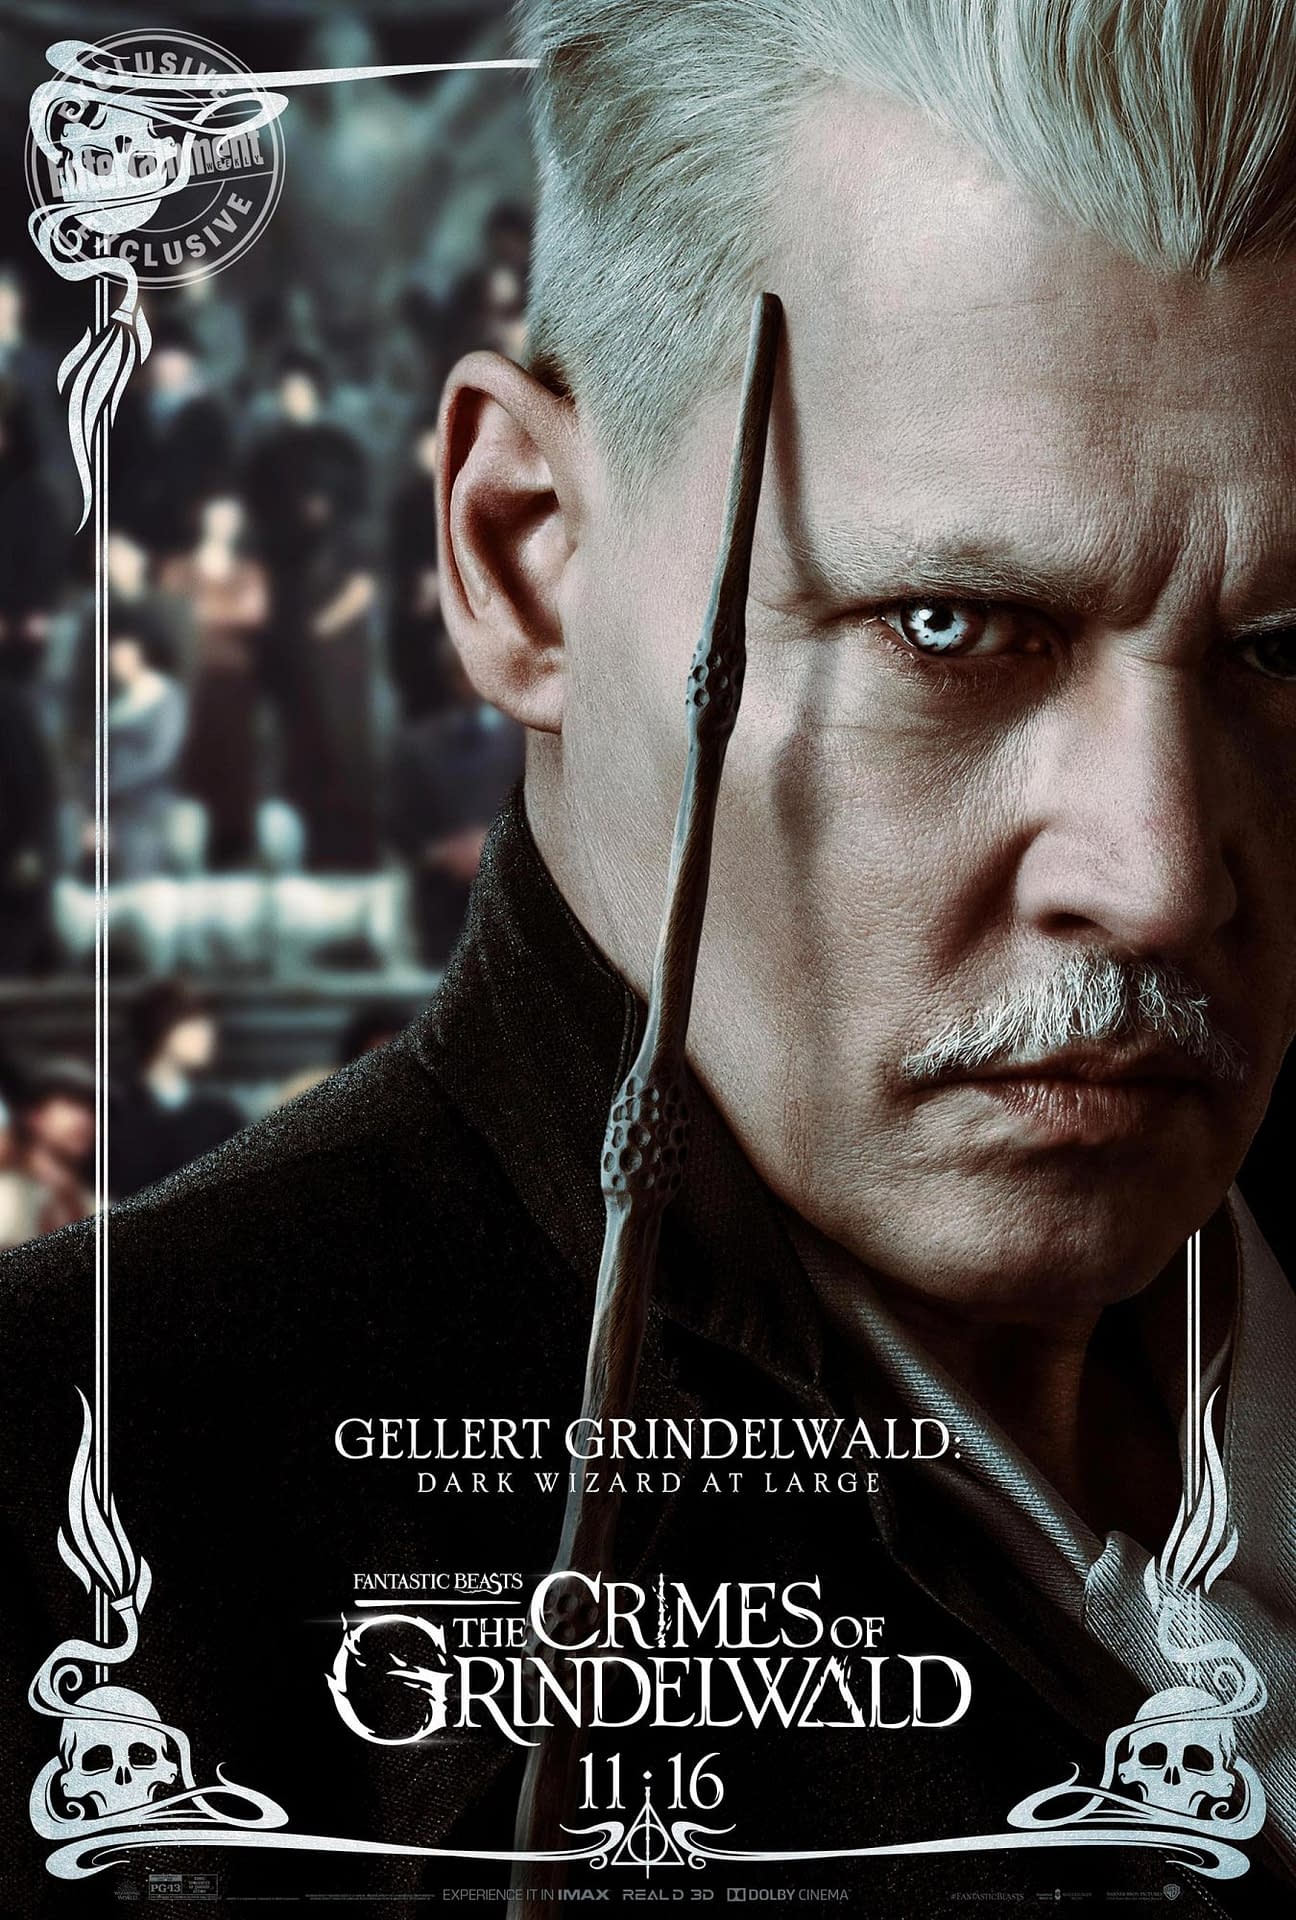 9 New Character Posters for Fantastic Beasts: The Crimes of Gindelwald